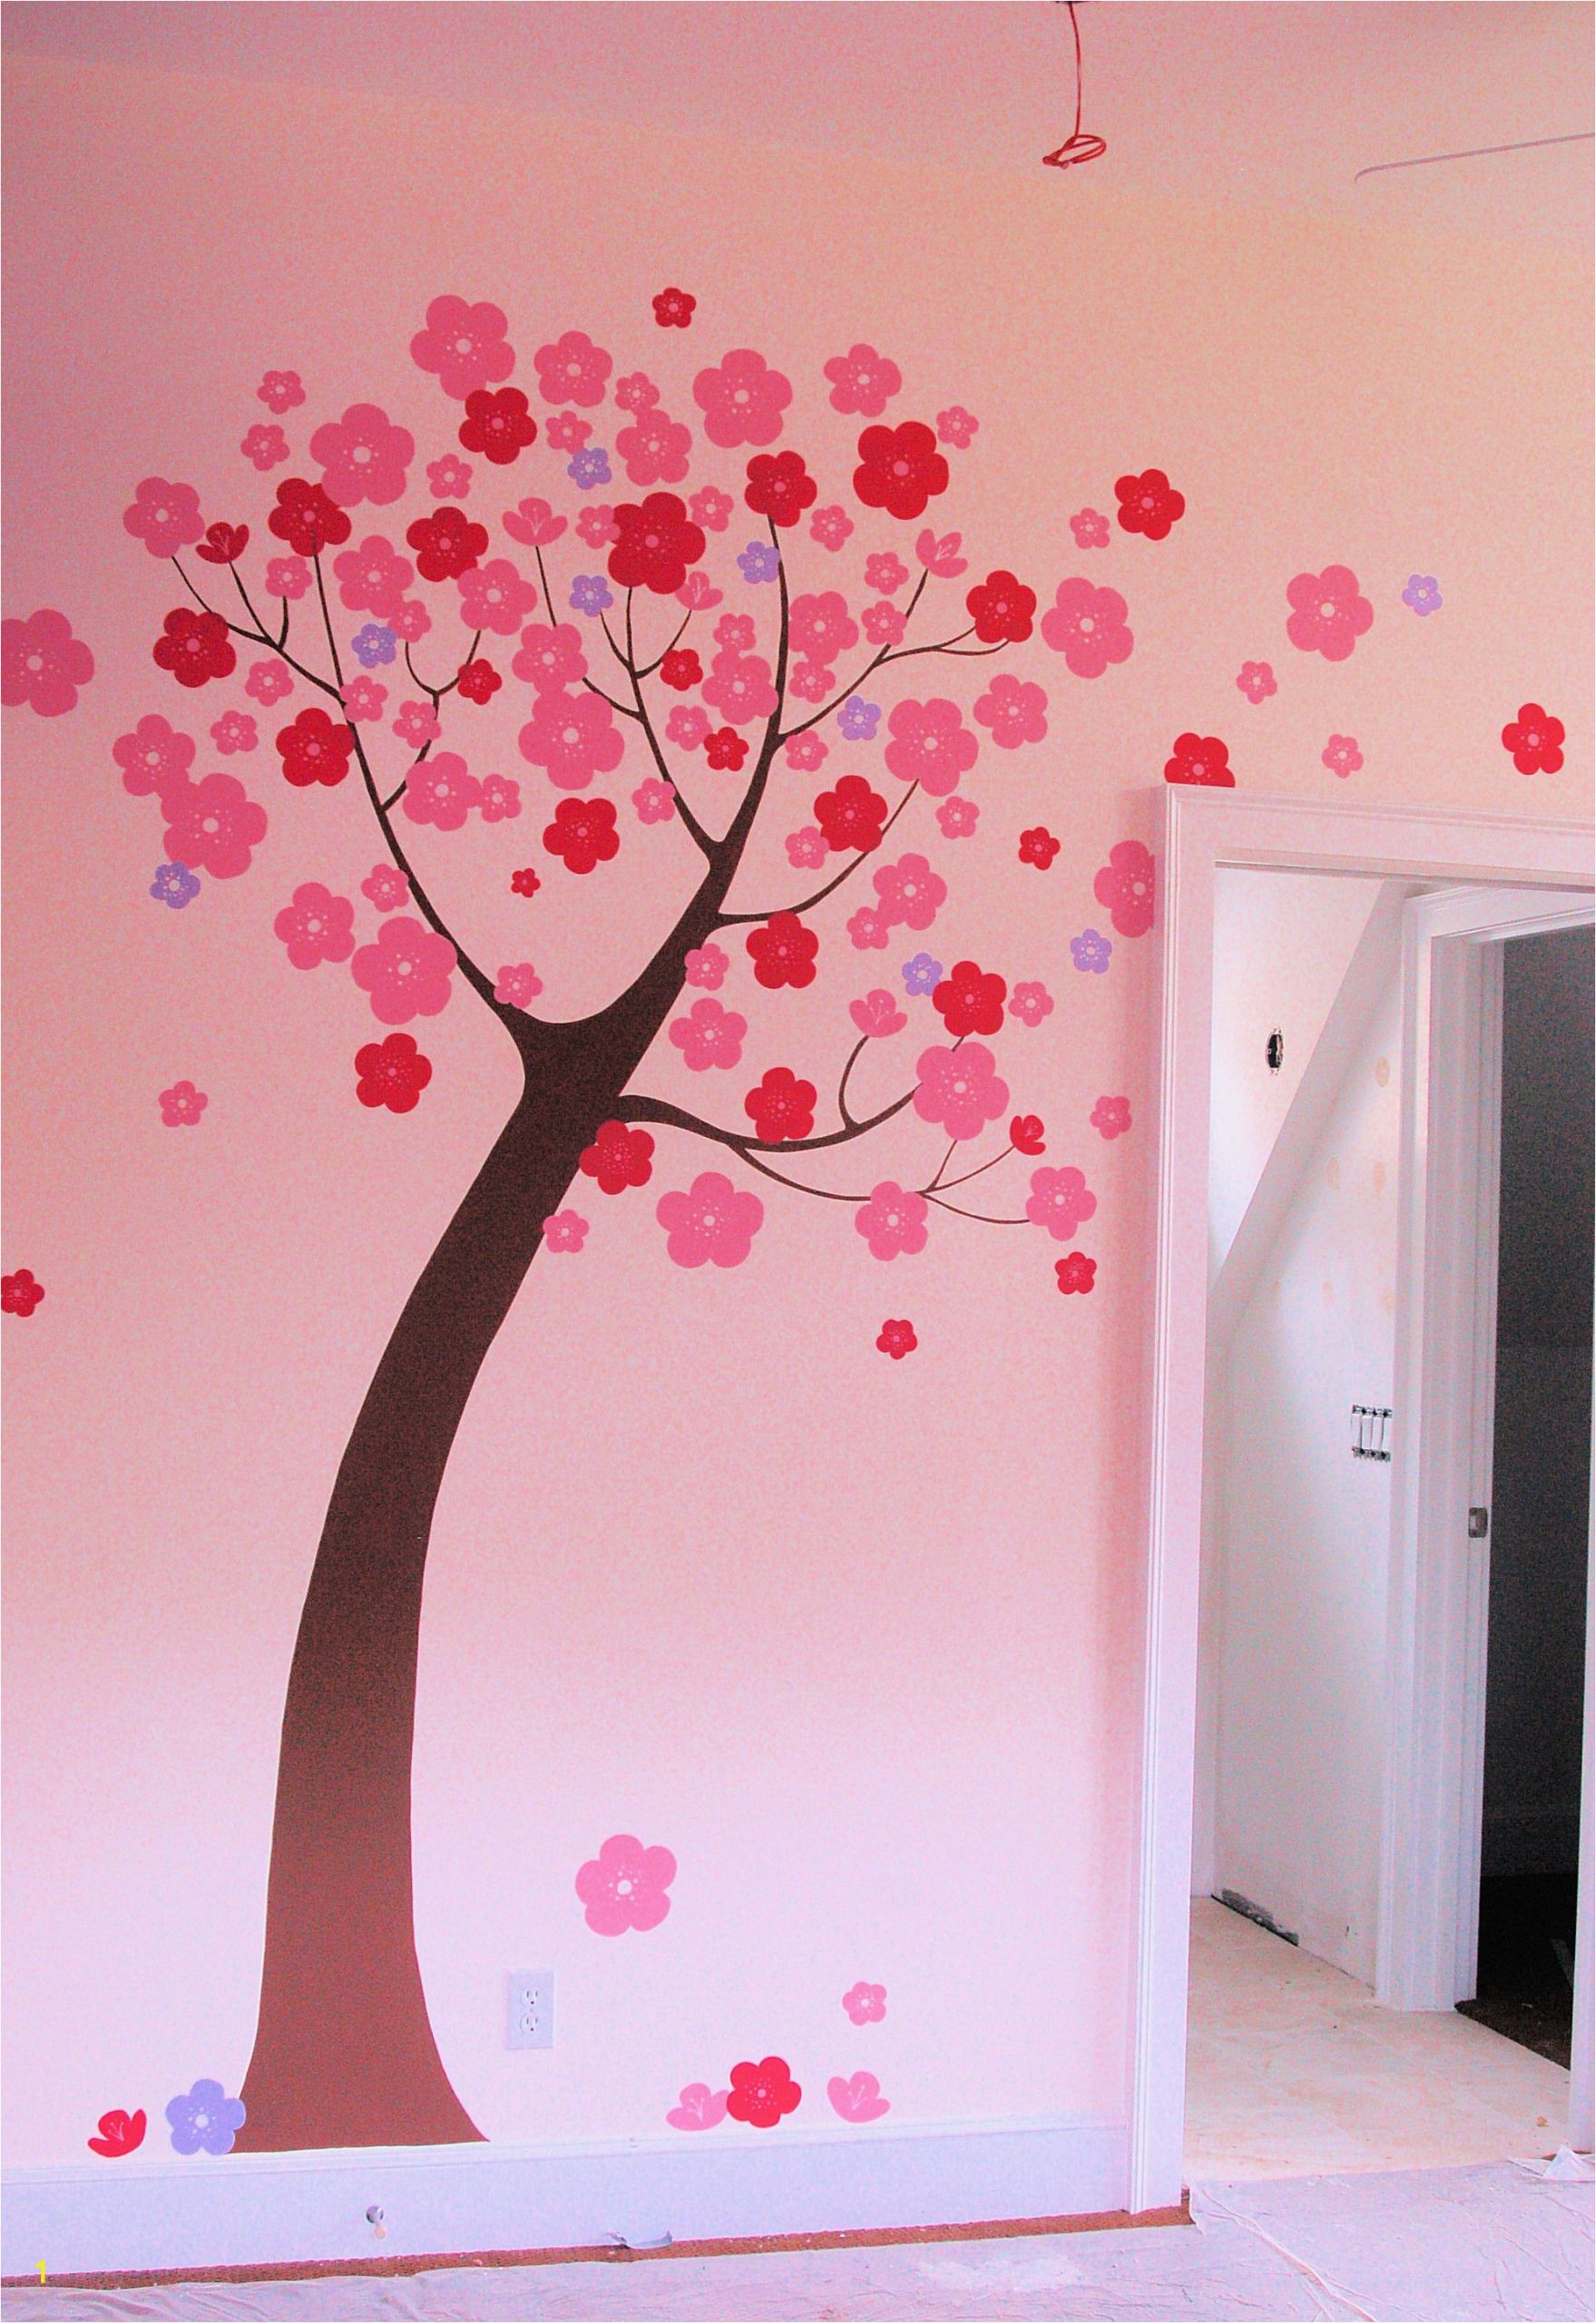 Hand Painted Tree Wall Murals Hand Painted Stylized Tree Mural In Children S Room by Renee